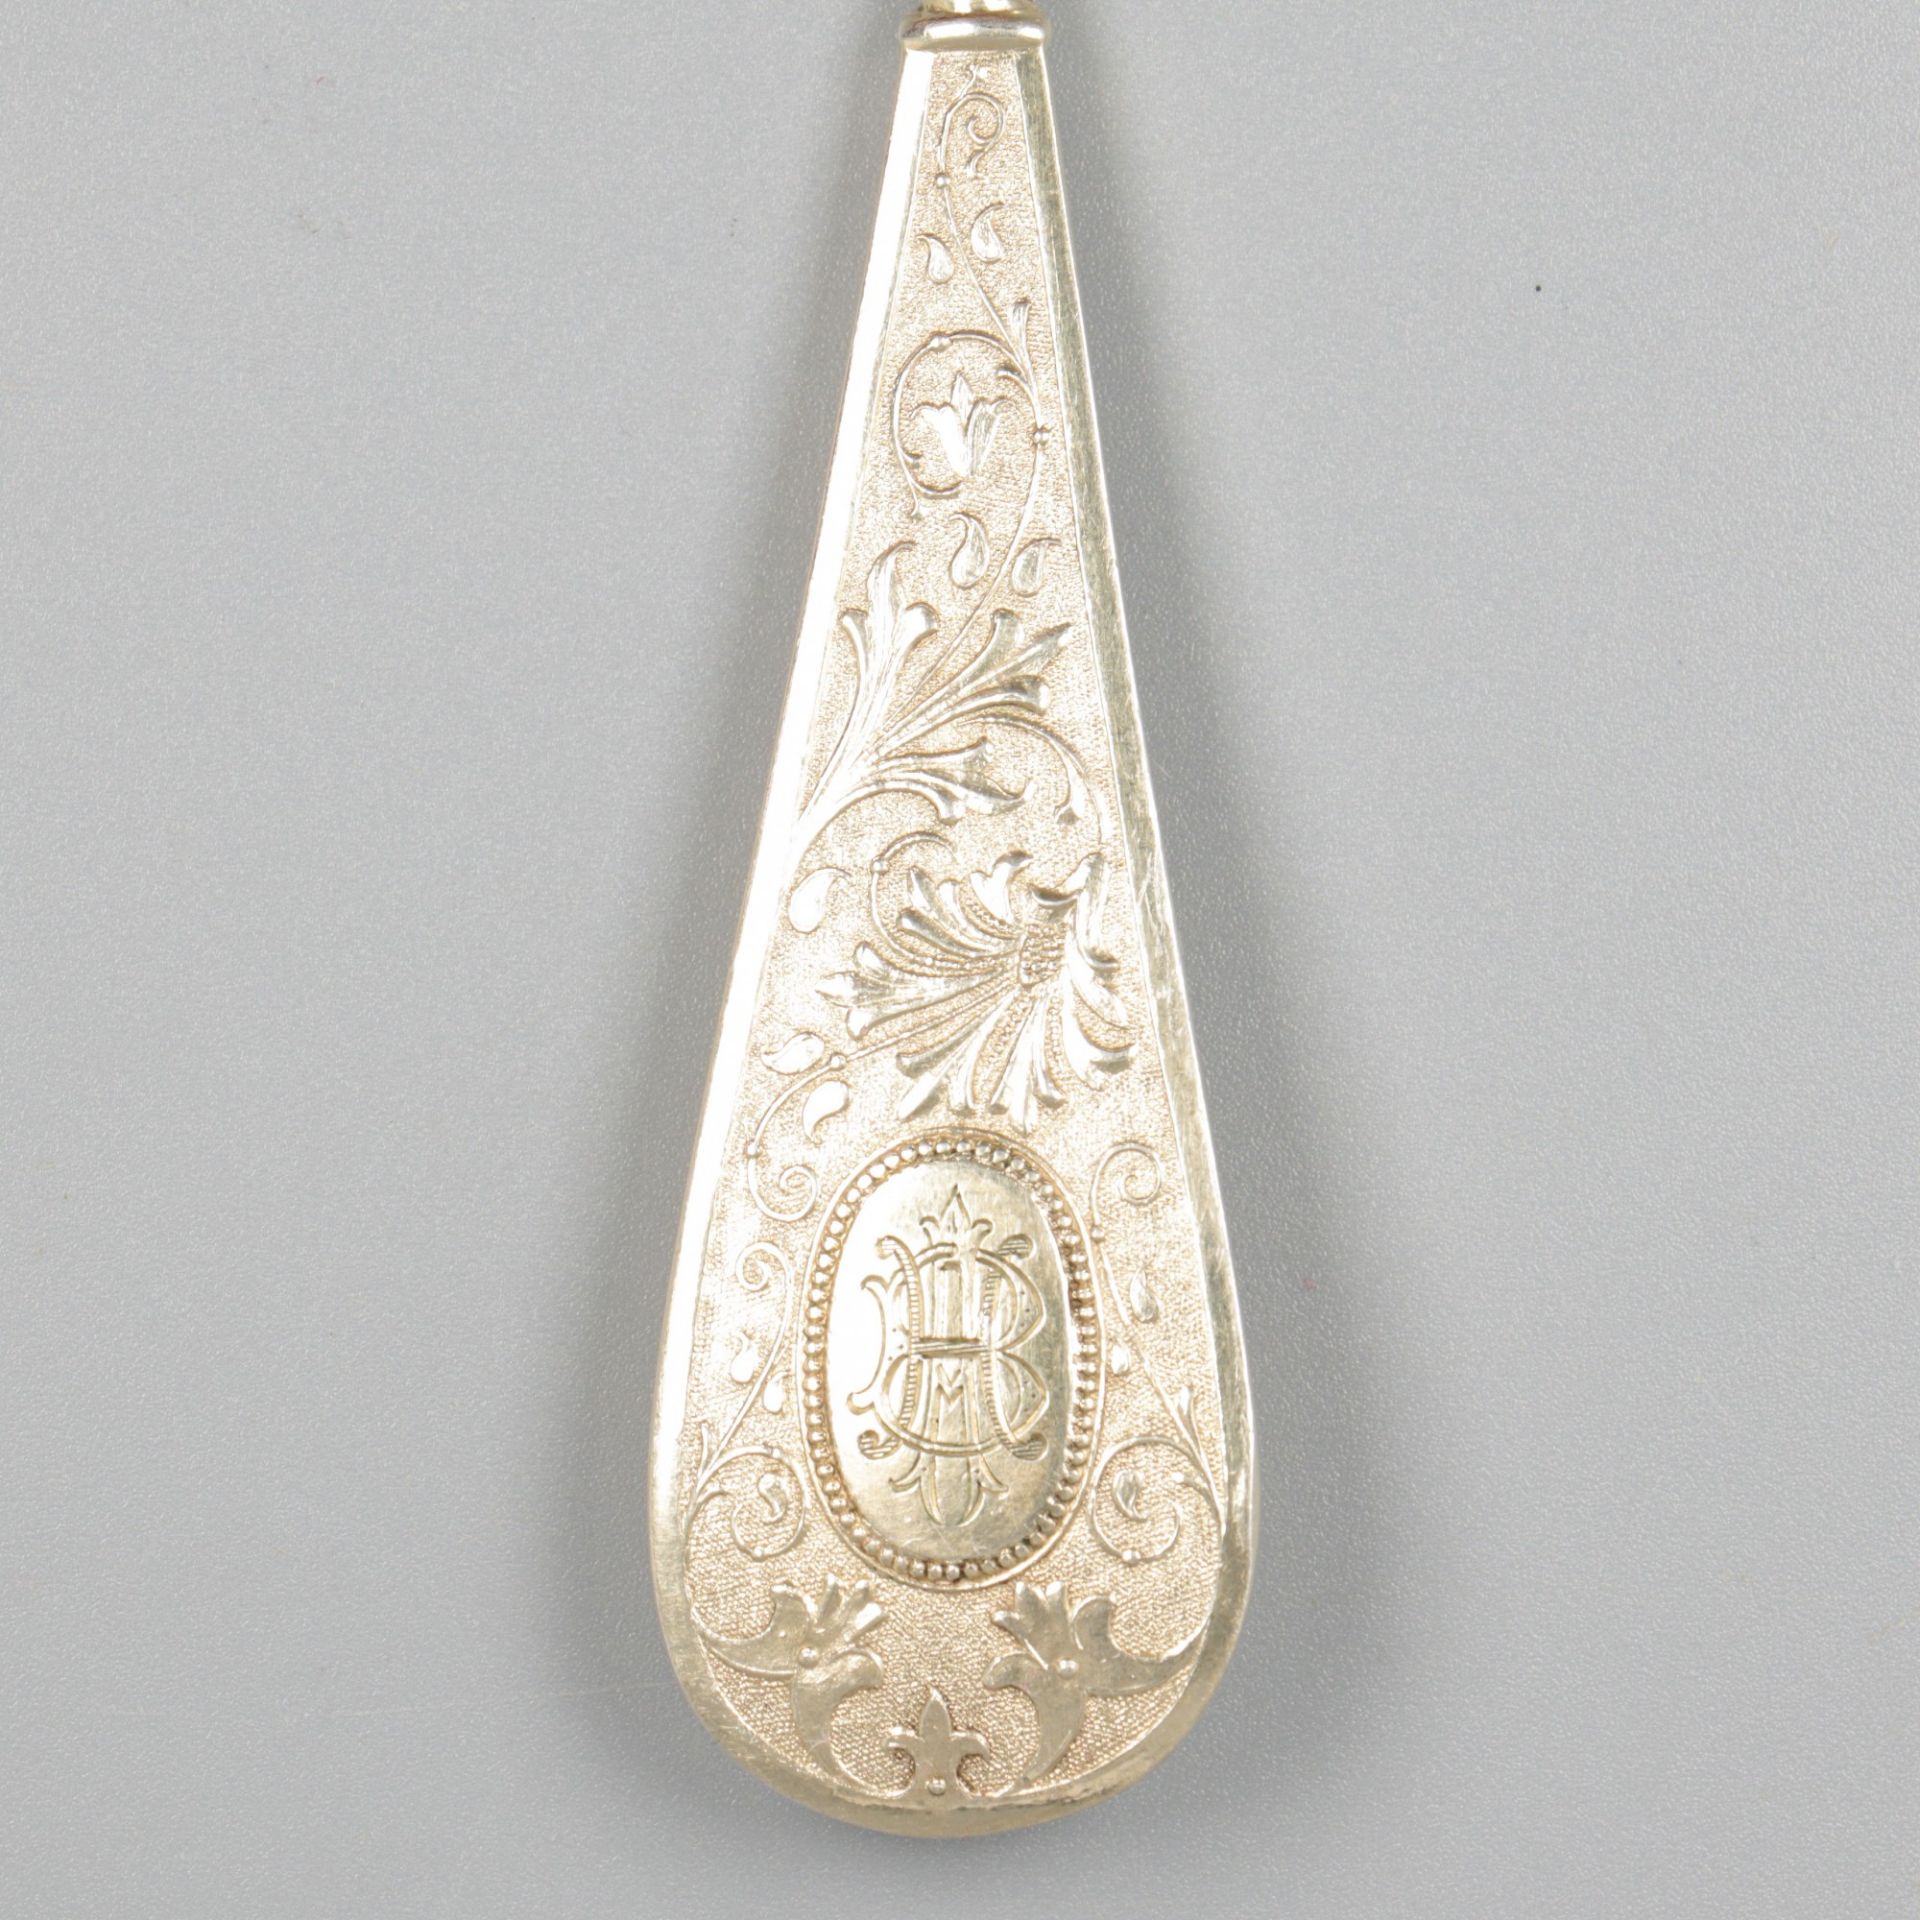 Pastry scoop / server silver. - Image 4 of 6